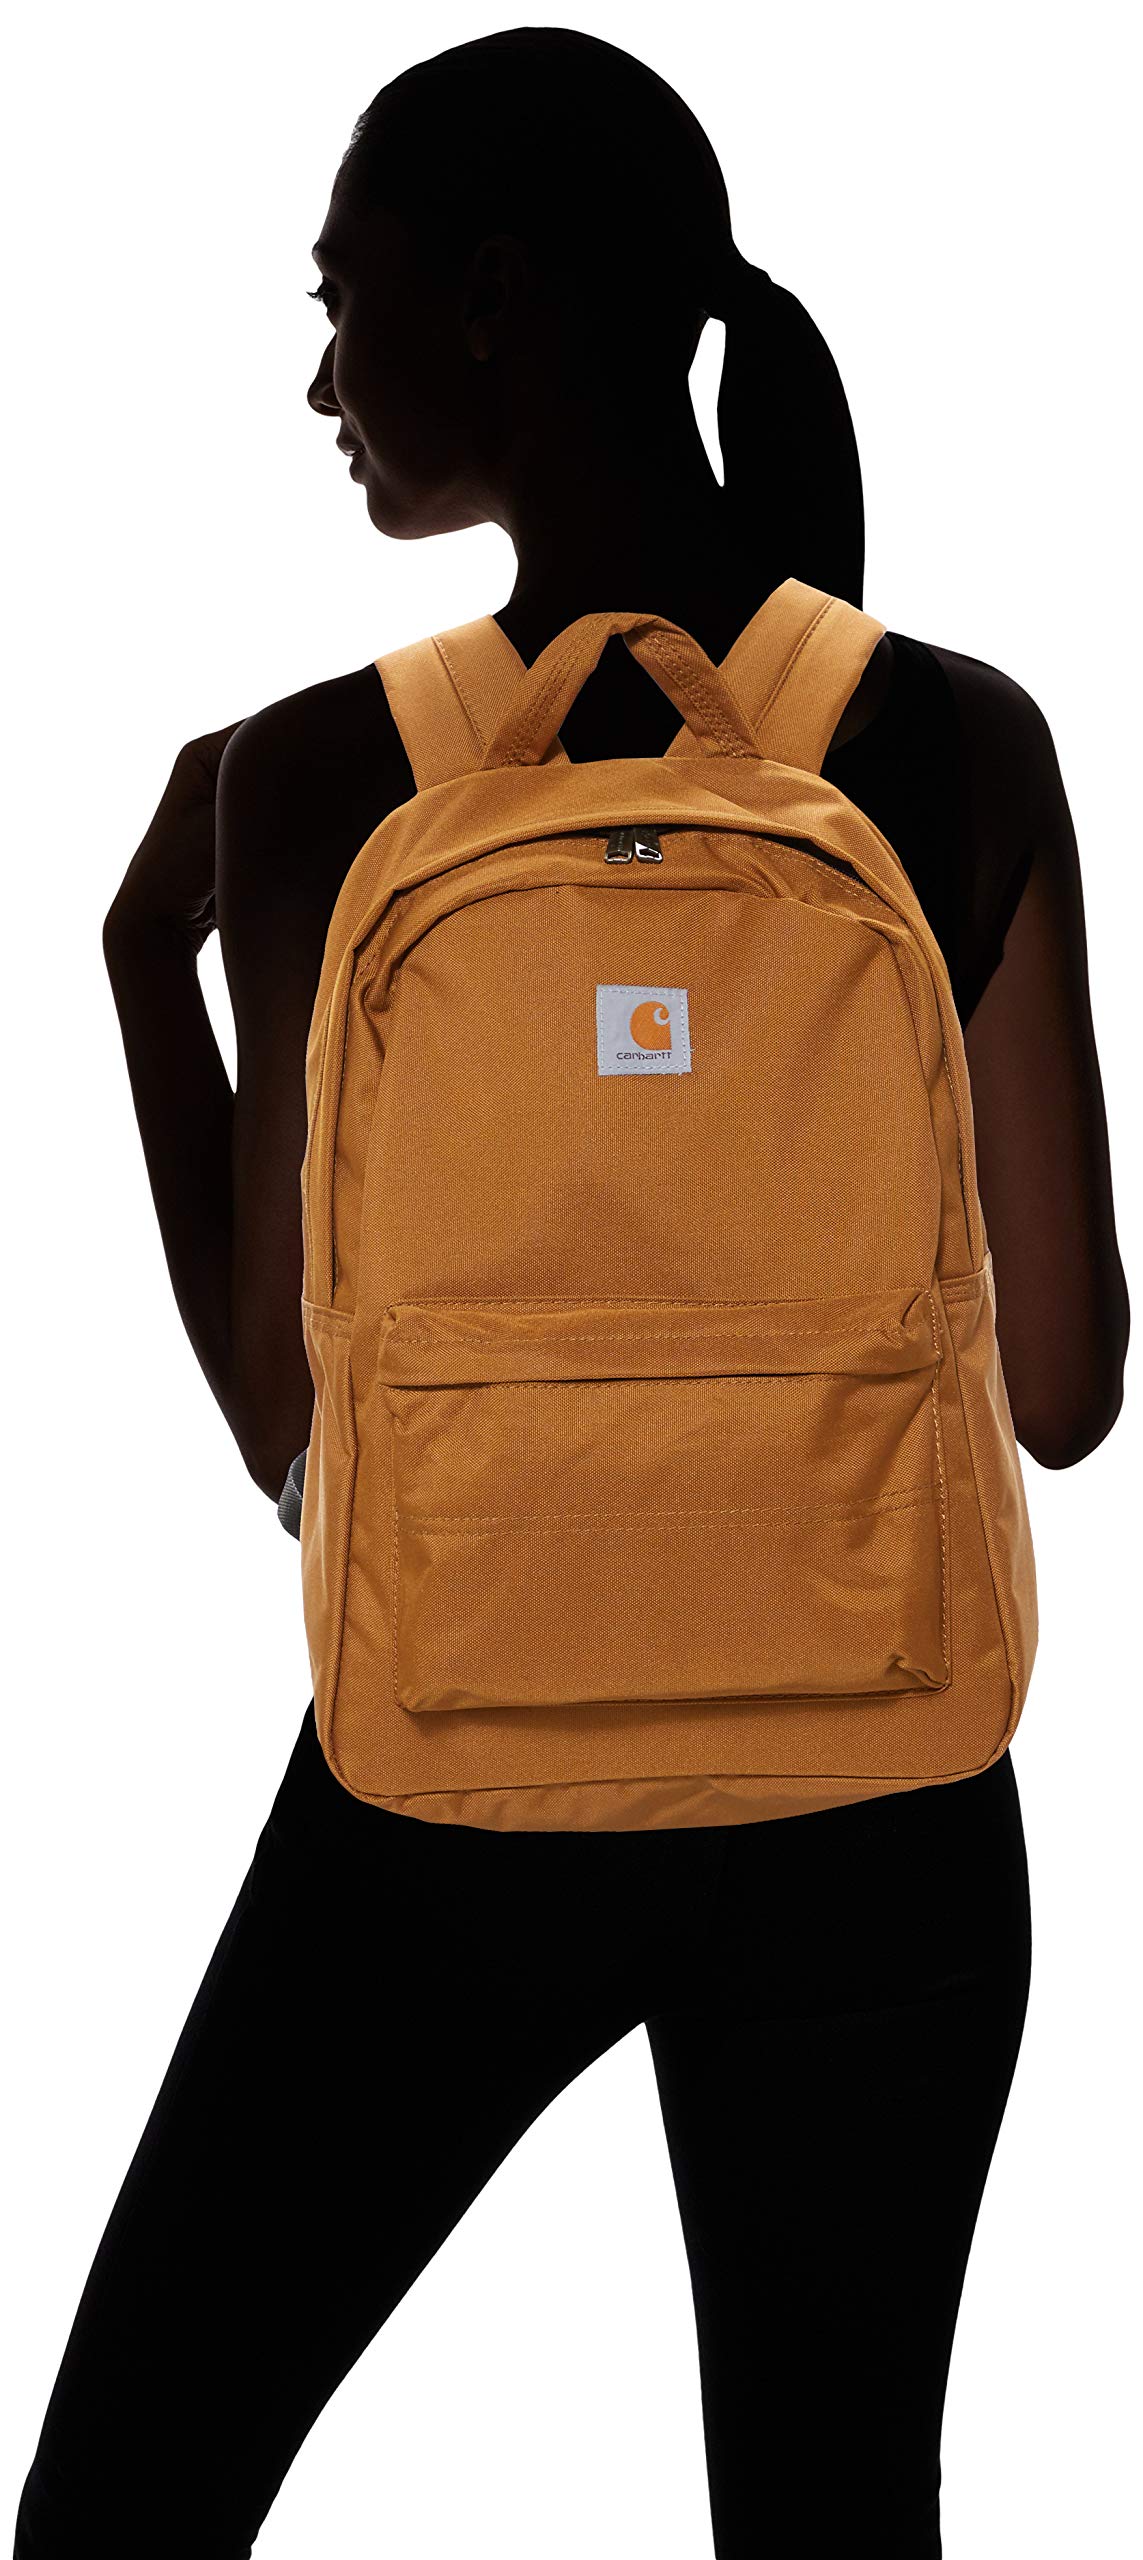 Carhartt Trade Backpack, Brown, One Size